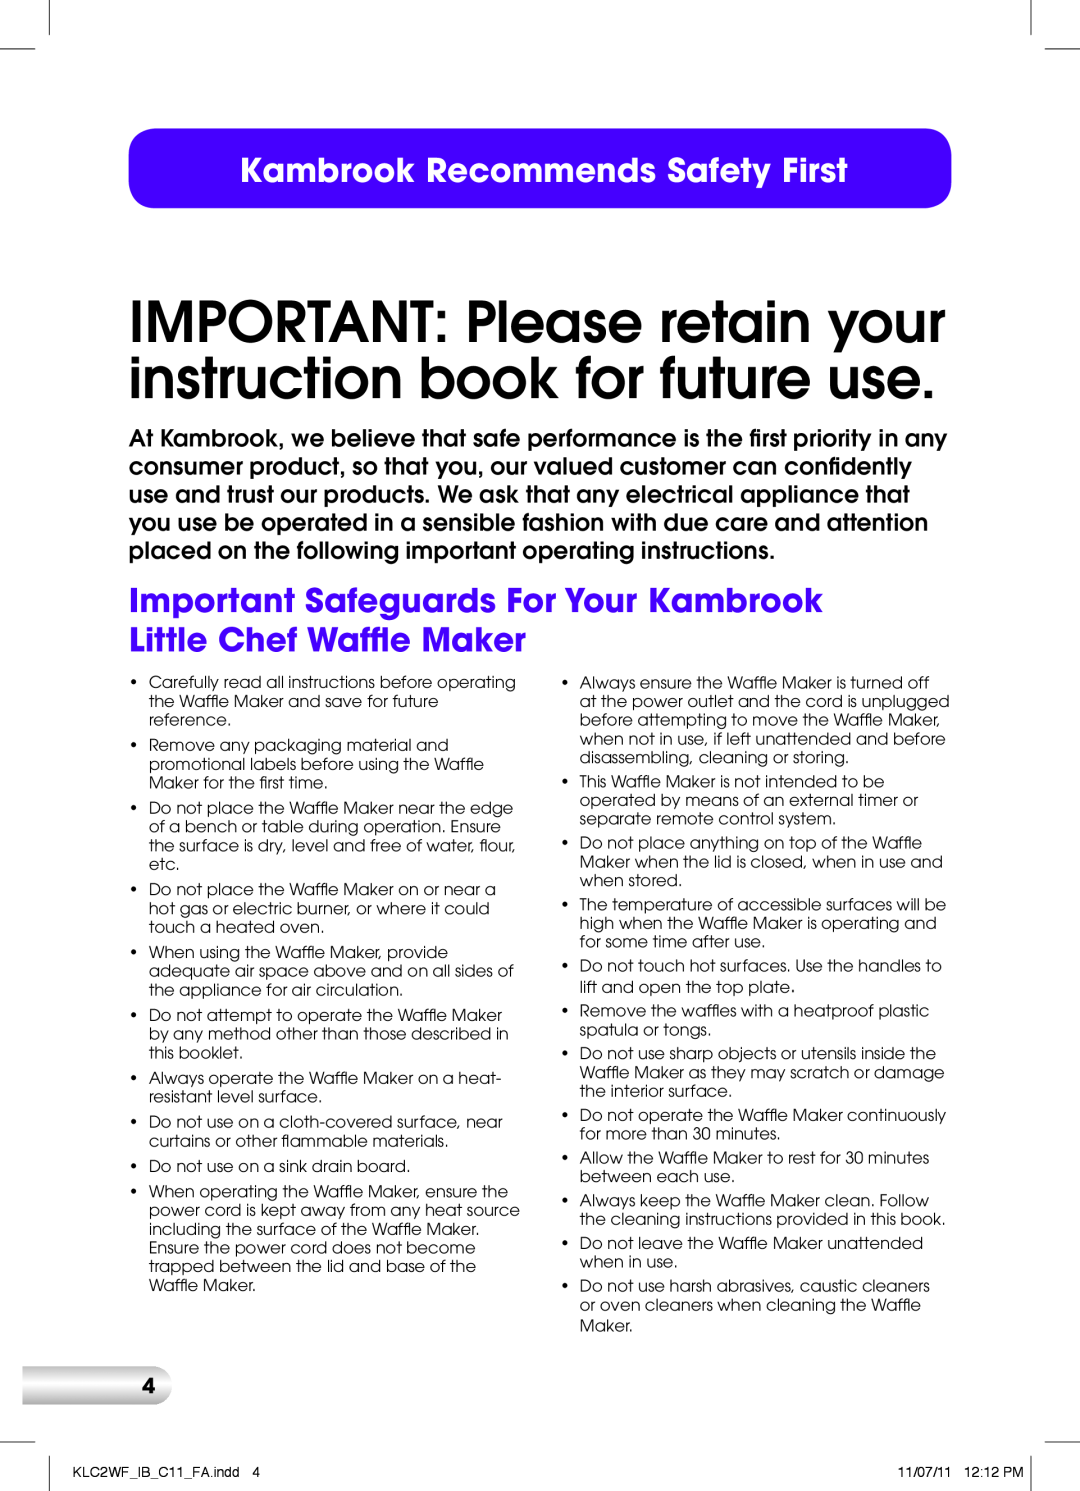 Kambrook KLC2WF manual Kambrook Recommends Safety First 